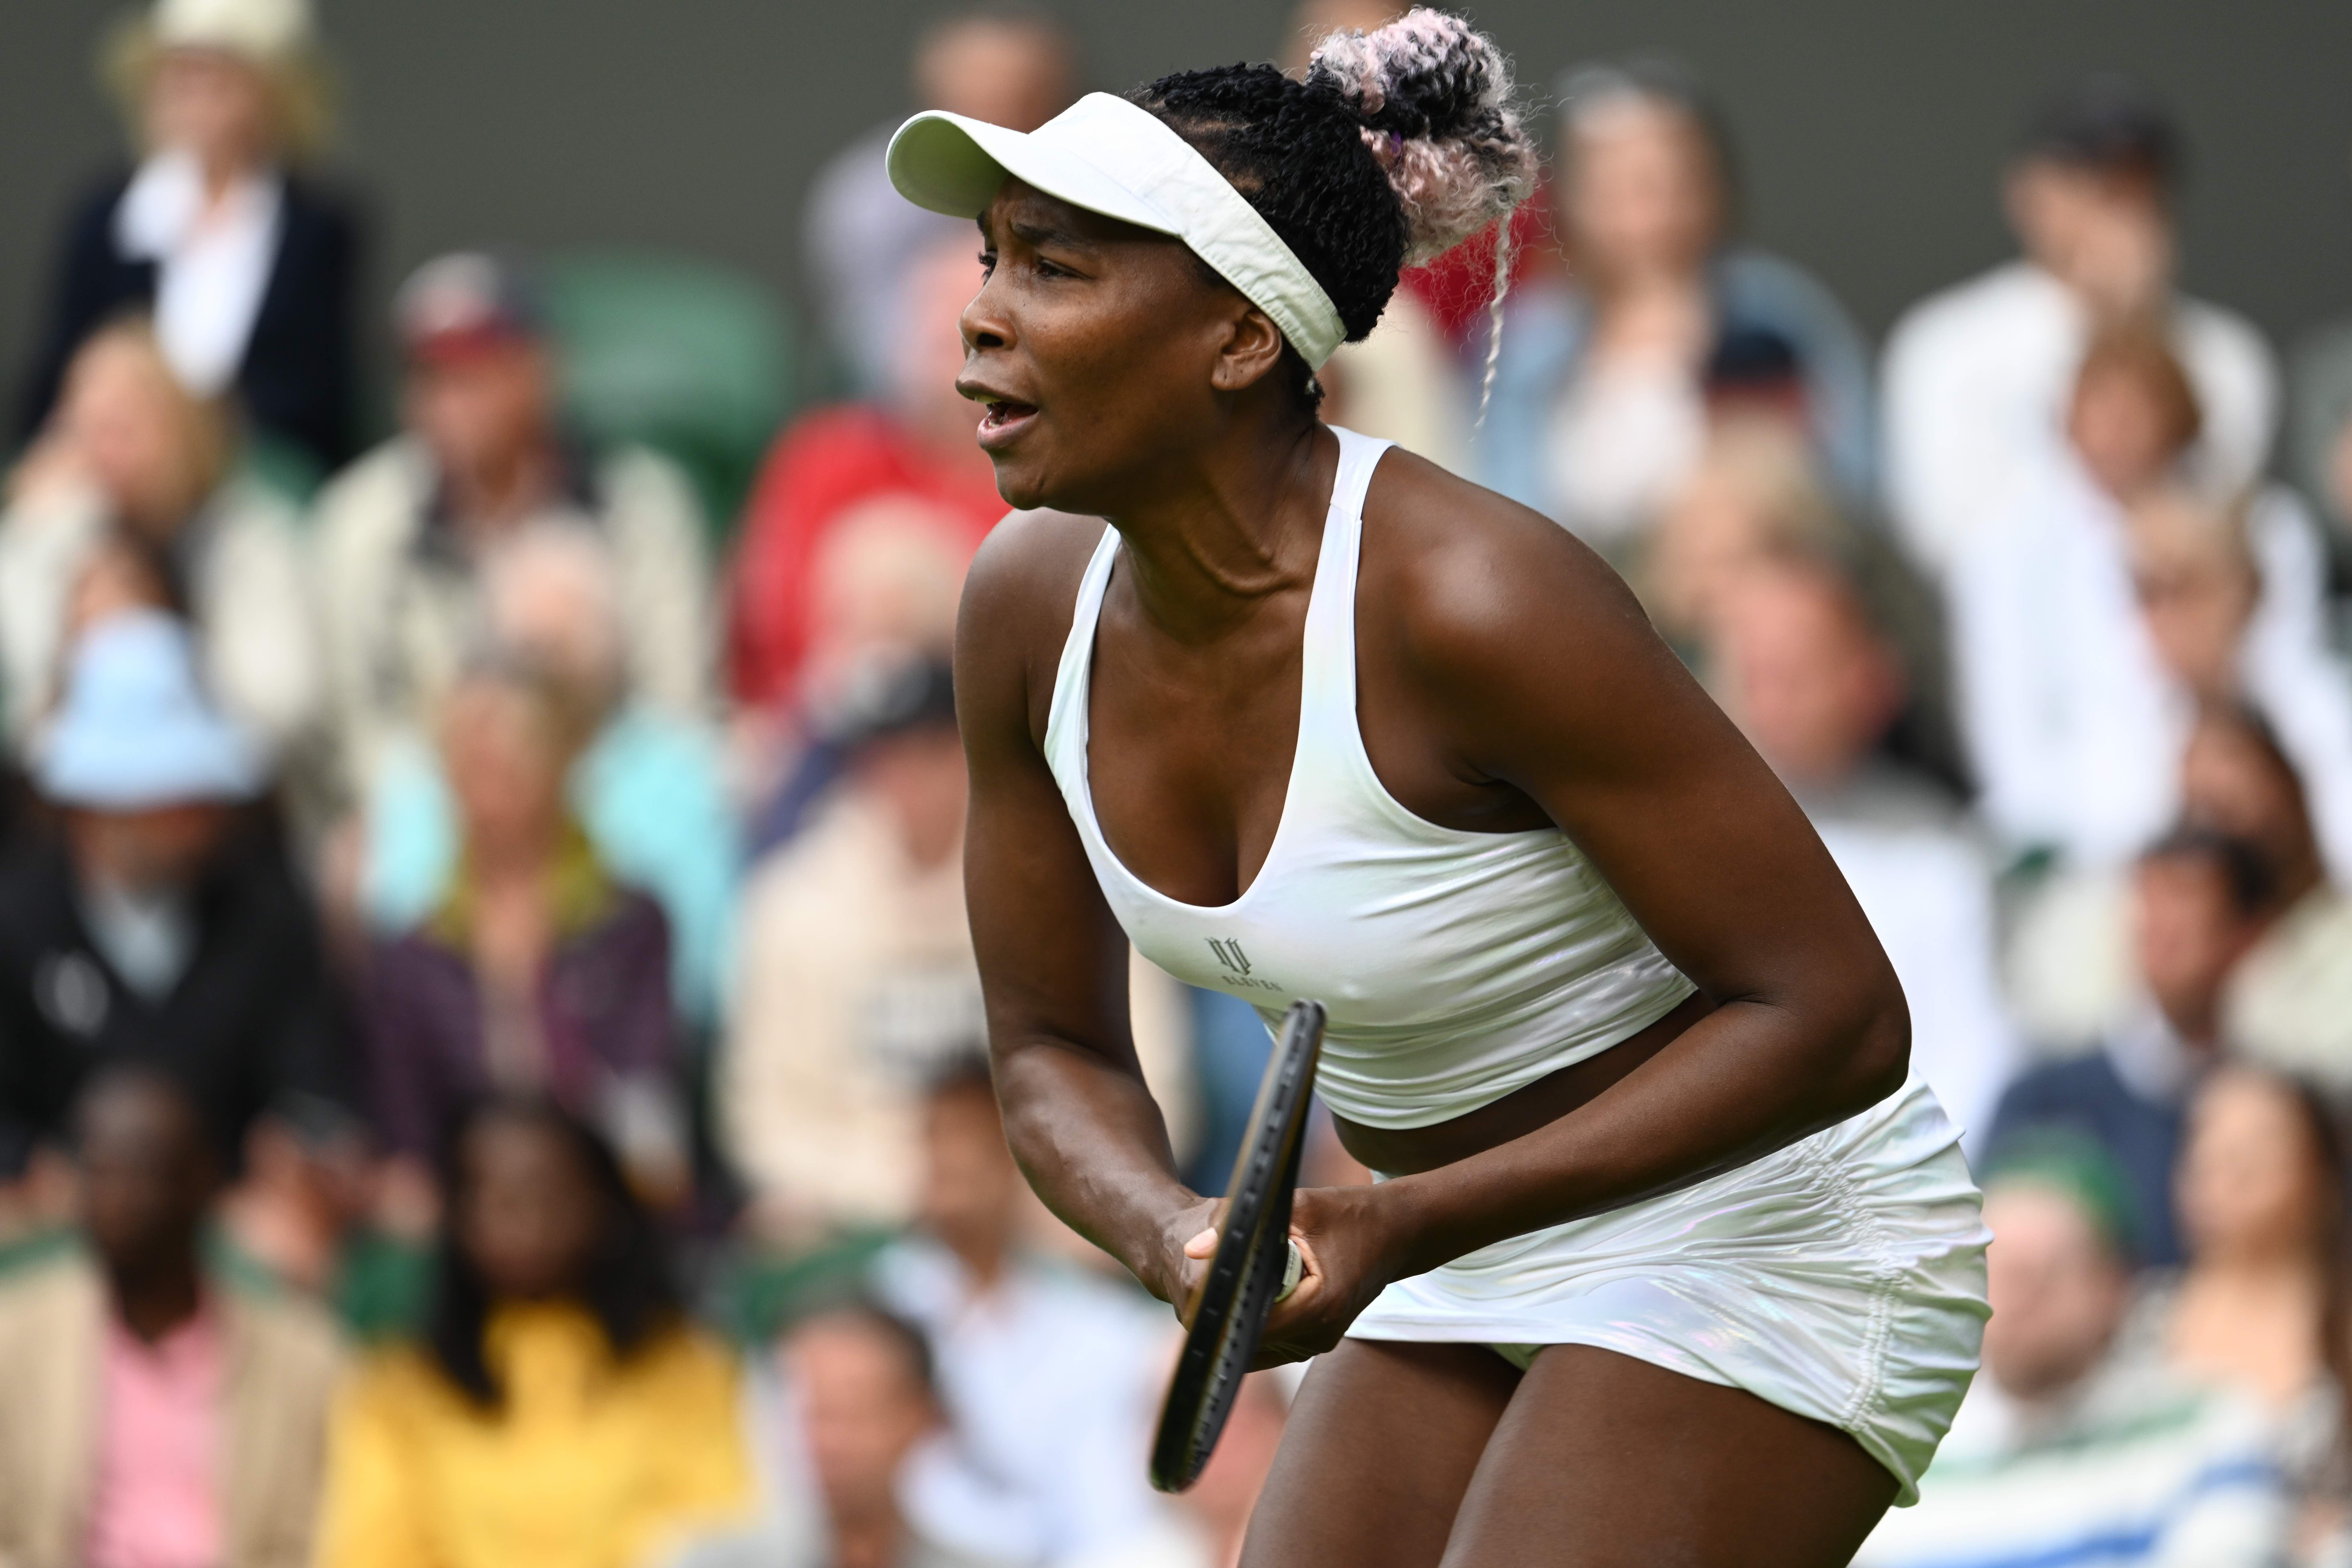 Great Outfits in Fashion History: Venus Williams in a Sporty Louis